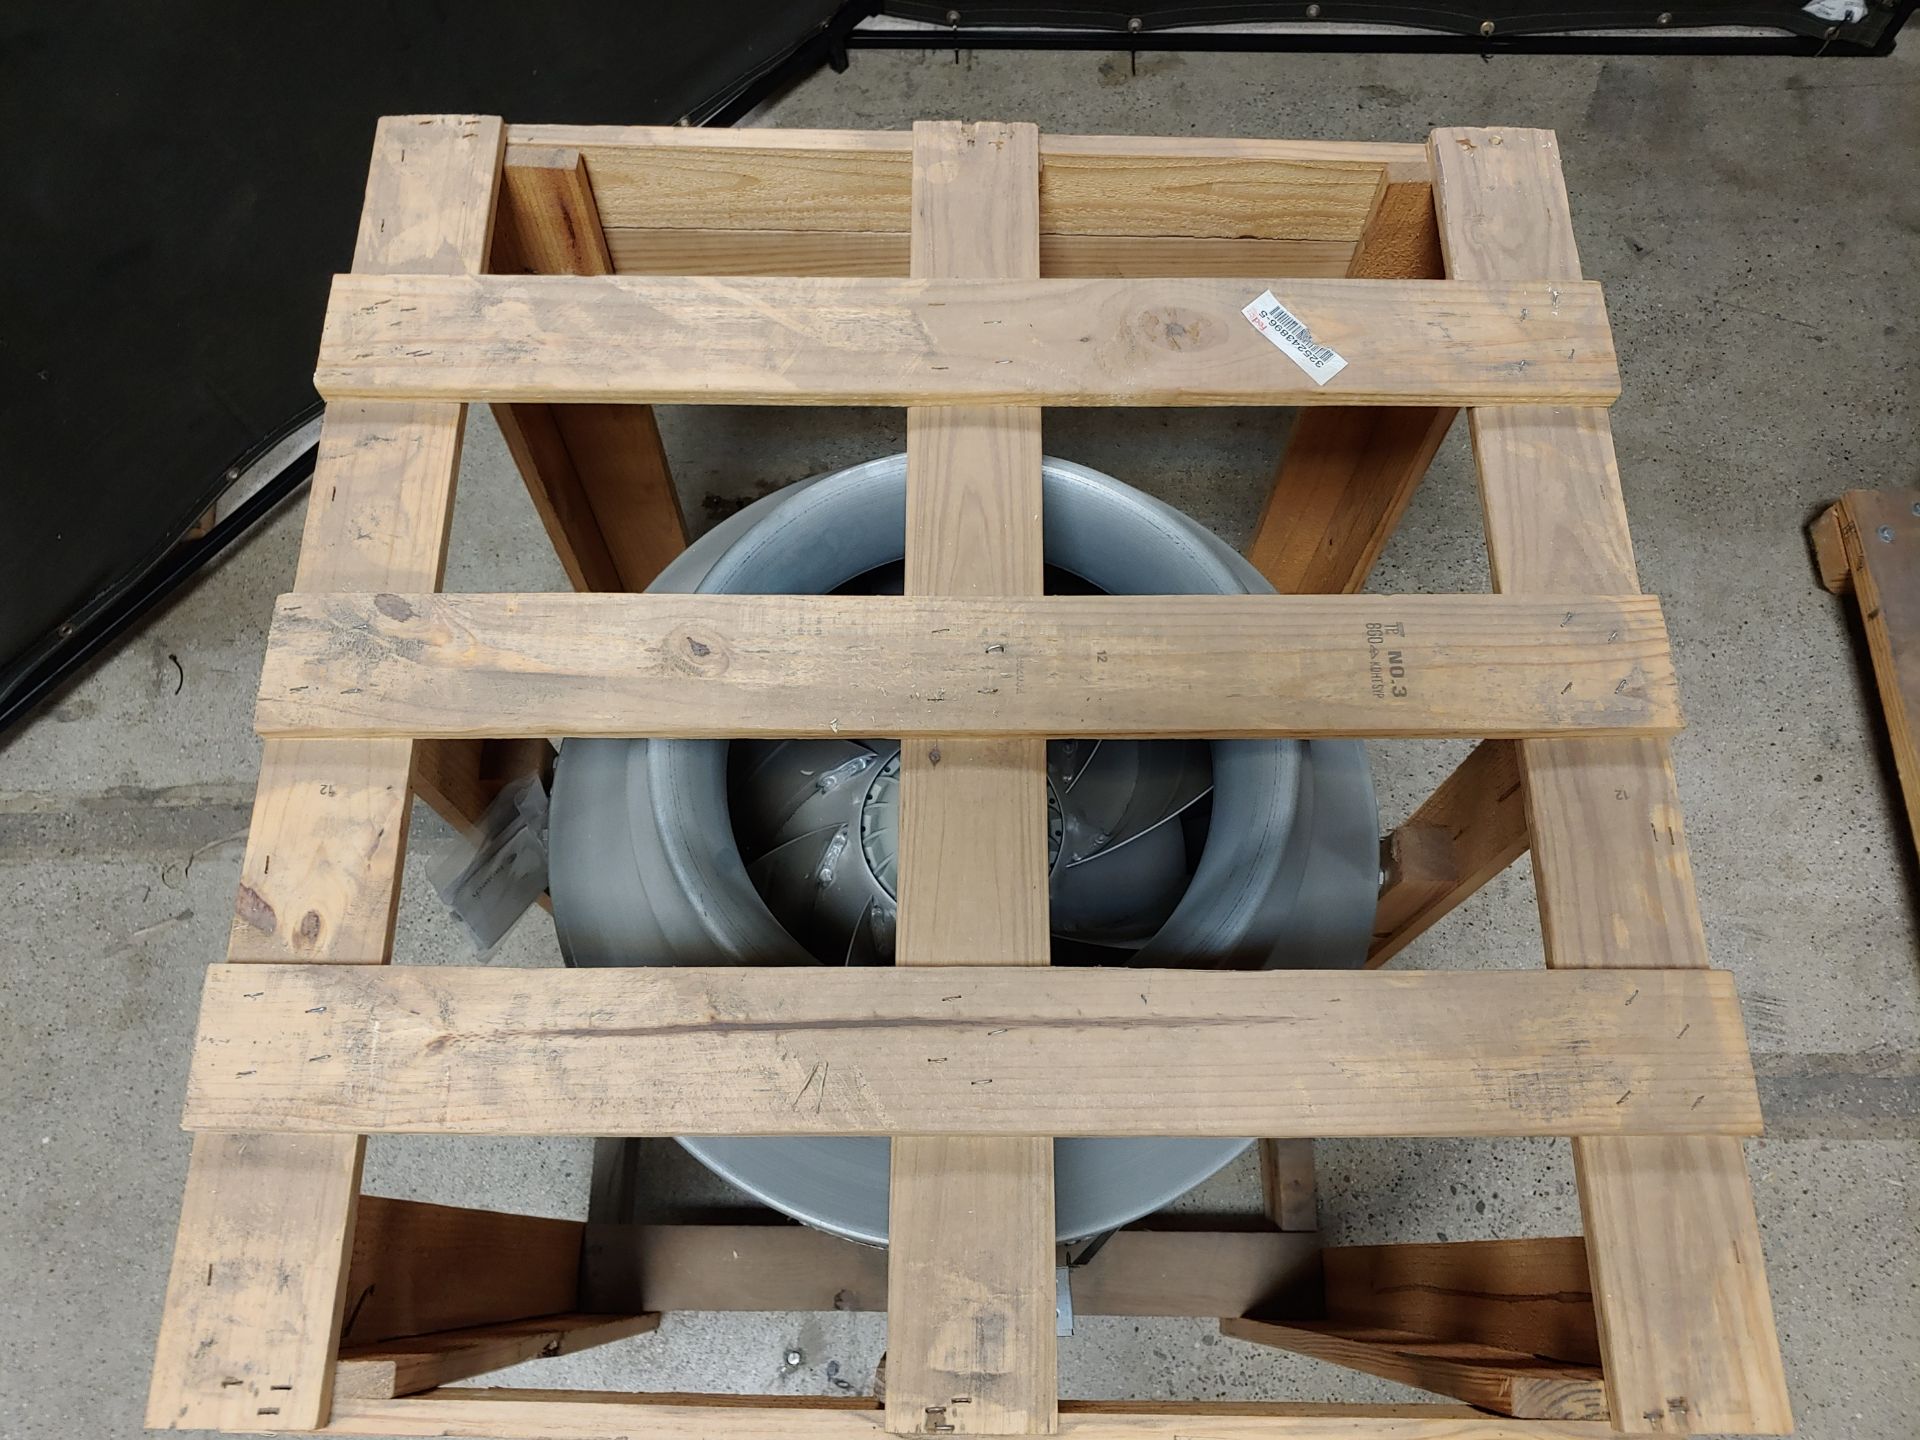 NEW OUT OF BOX - FANTECH ROUND INLINE MIXED FLOW CENTRIFUGAL FAN FKD-18XL, 18" DUCT (6,236 CFM) - Image 3 of 5